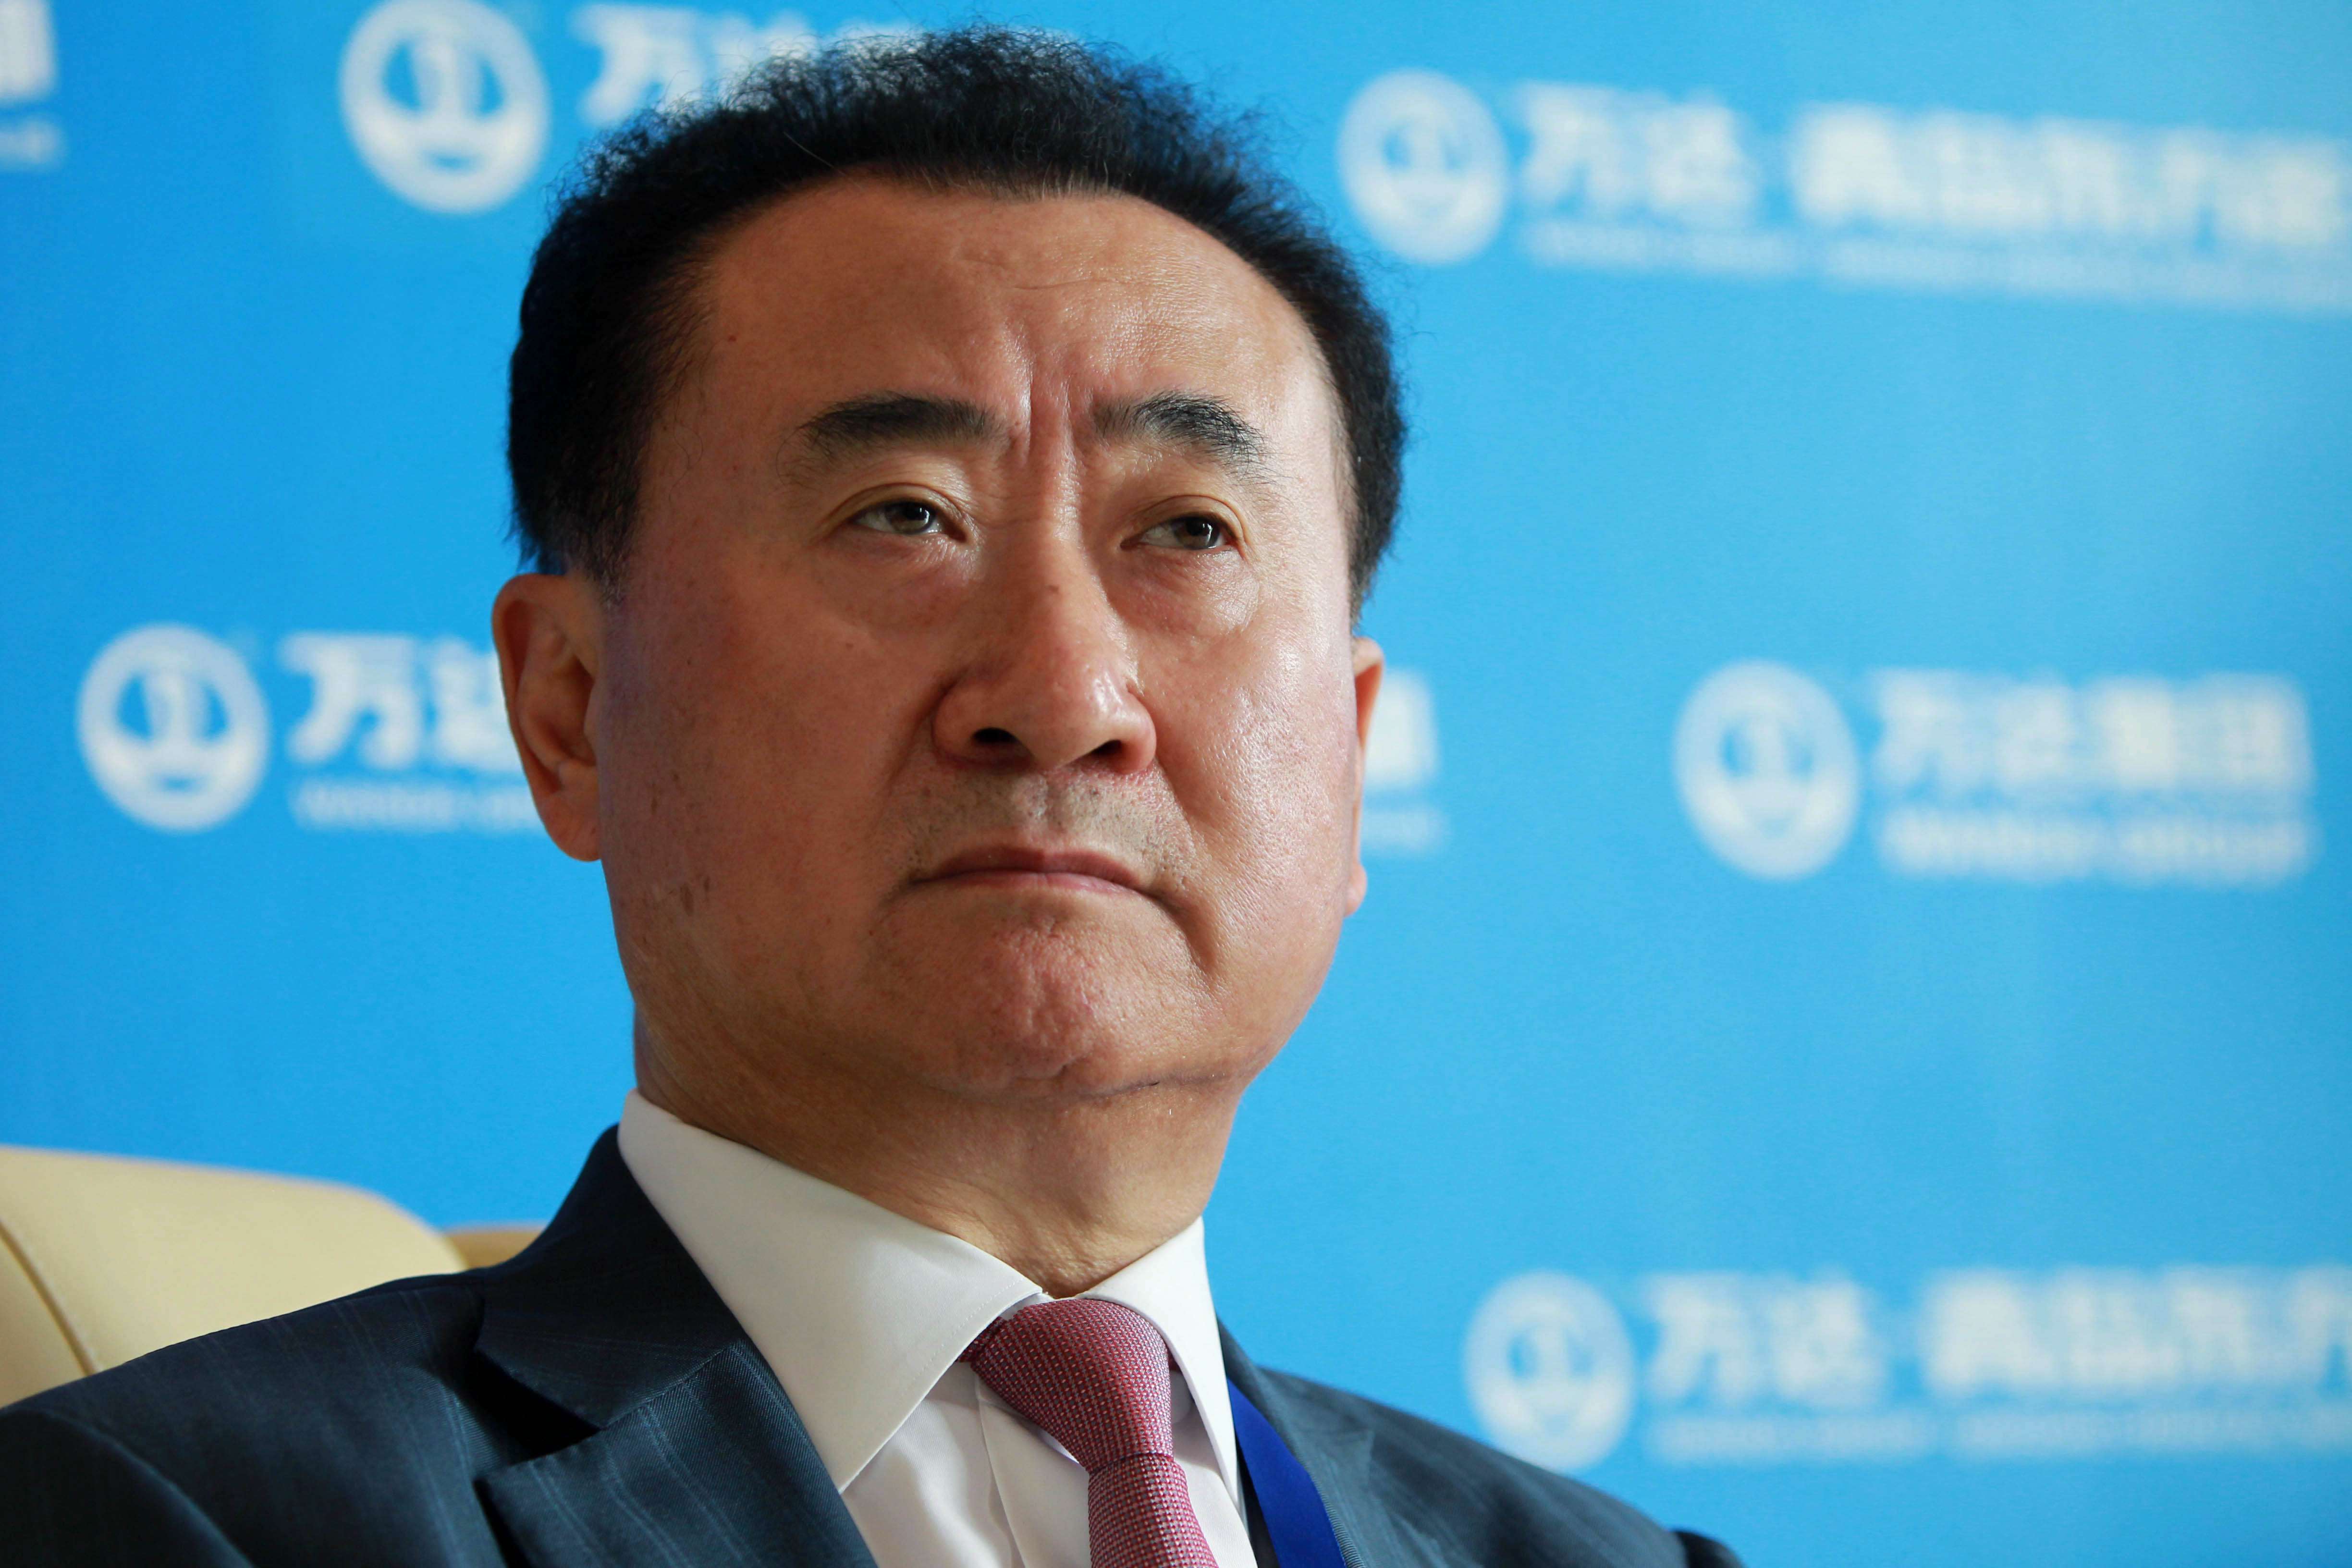 Wanda Group’s founder and chairman Wang Jianlin laid bare the succession plan for his conglomerate, but his only son isn’t in the picture because the scion “aspires to a different quest,” he said. Photo: Simon Song